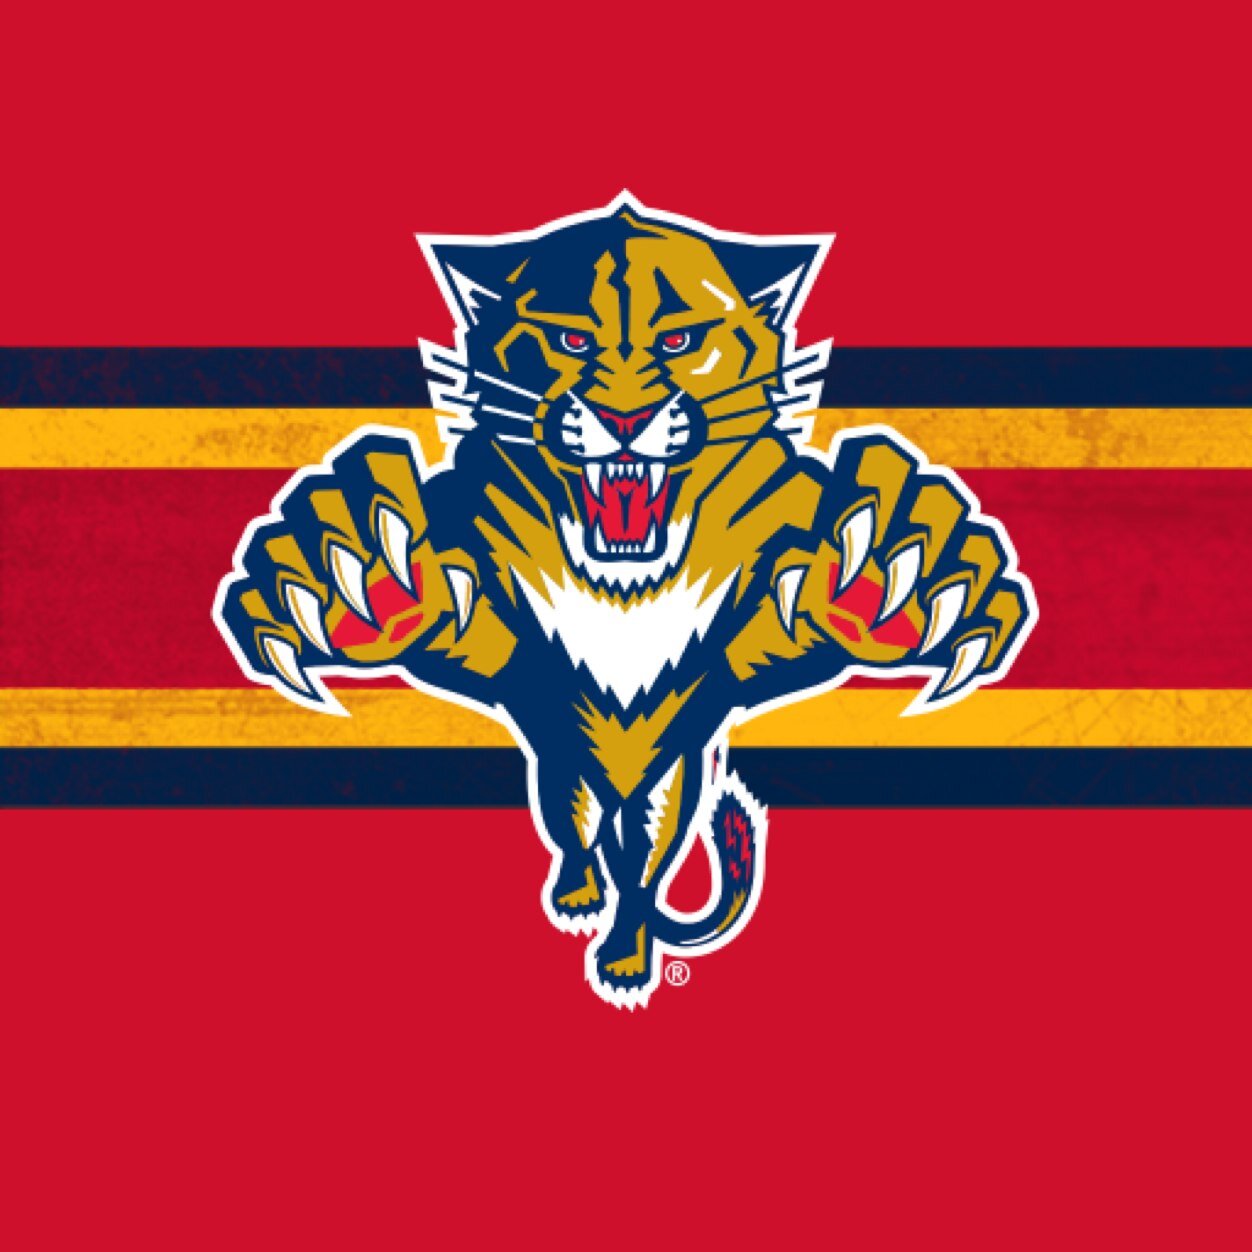 Official Twitter of the | NHL 15 | EA Sports Florida Panthers. (Not Affiliated with @FlaPanthers). #NHLPanthers